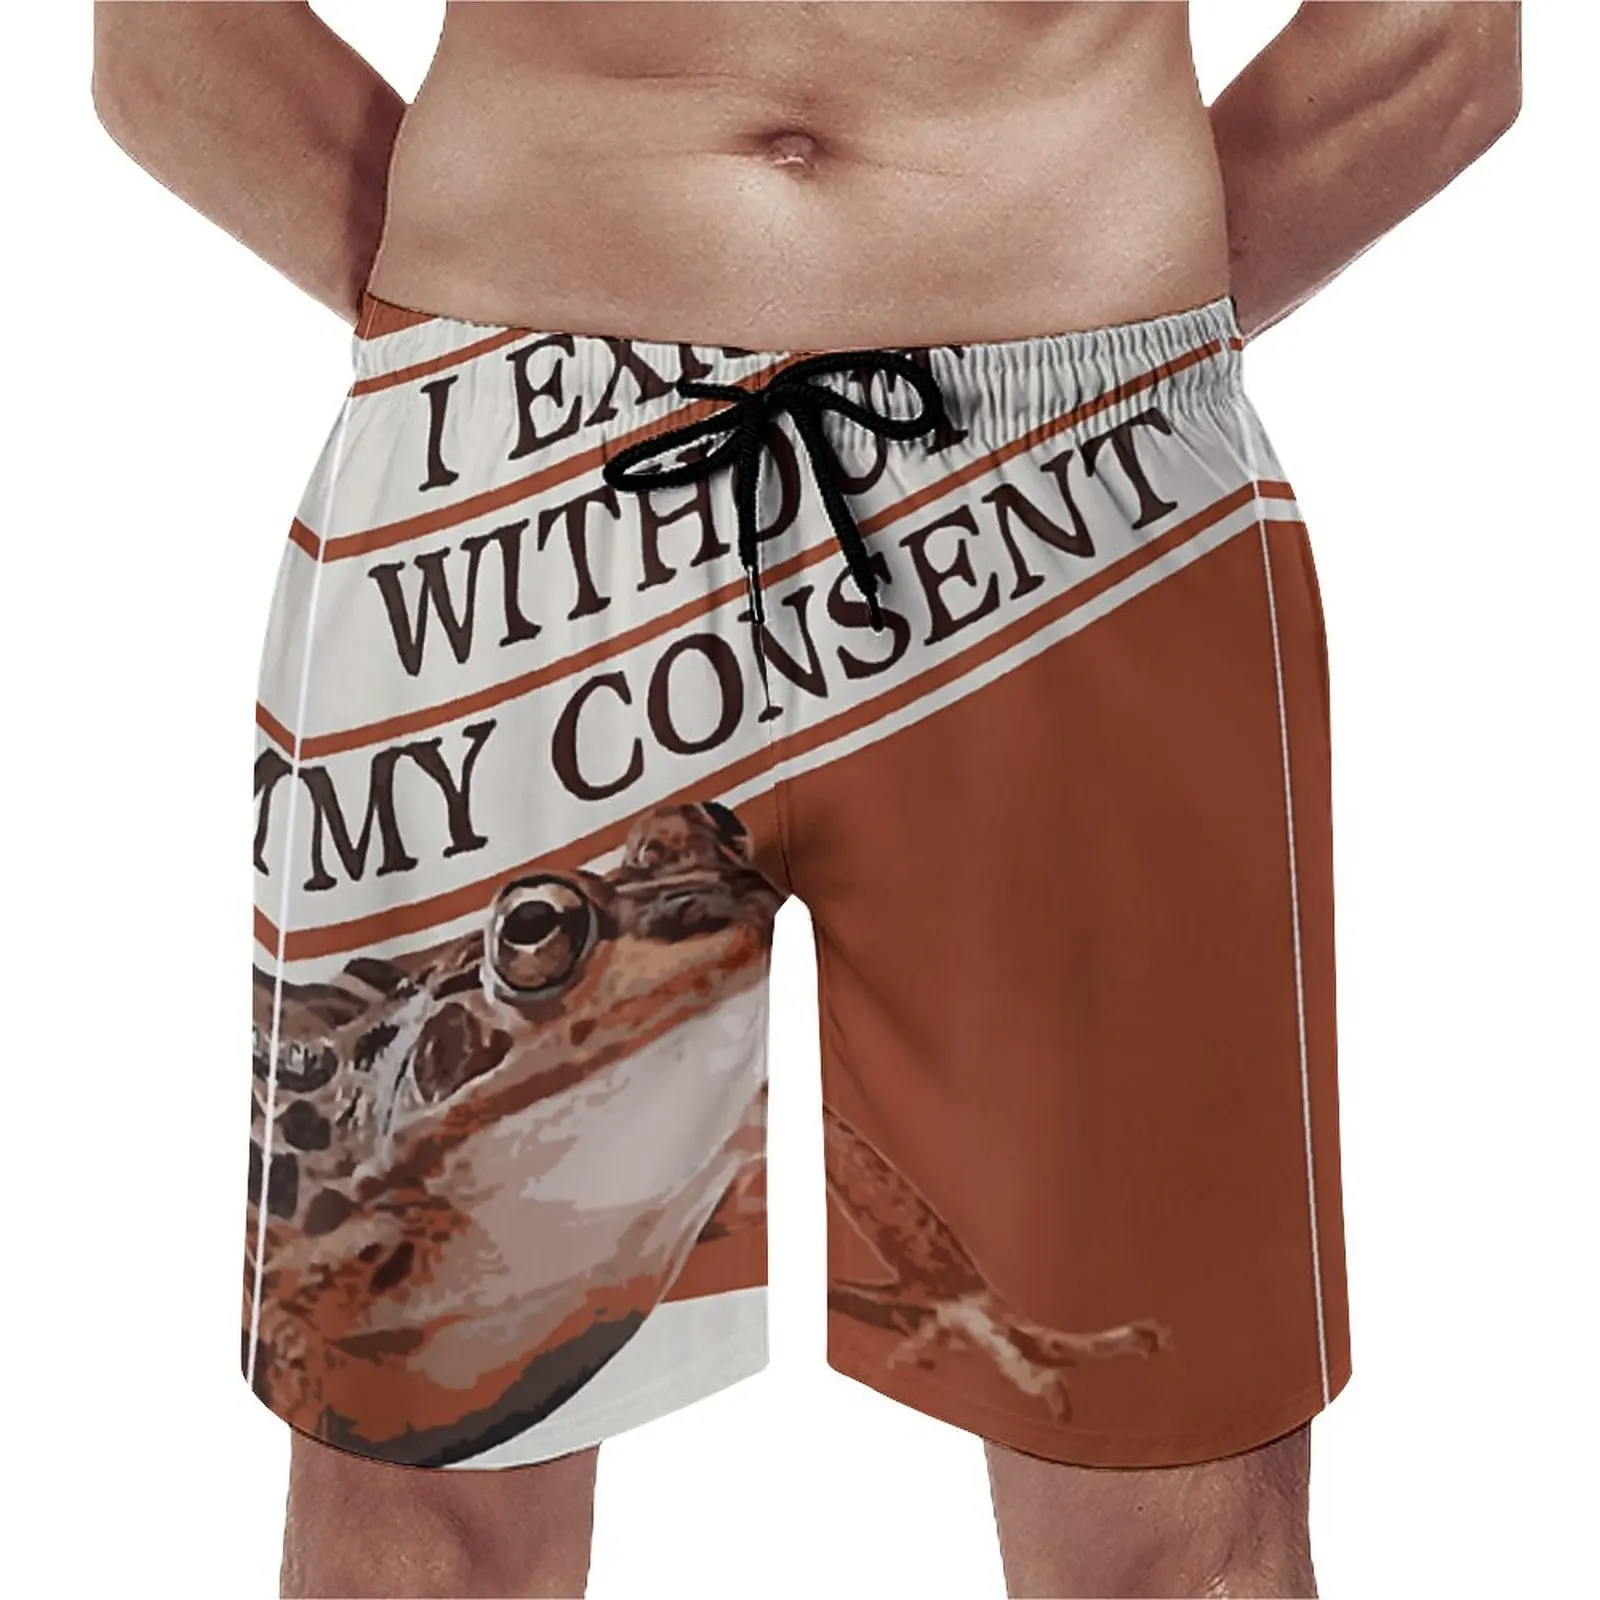 

Beach Shorts I Exist Without My Consent Frog 3 Sea Beach Breathable Quick Dry Funny Graphic Casual Summer Arbitrary Adjustable D